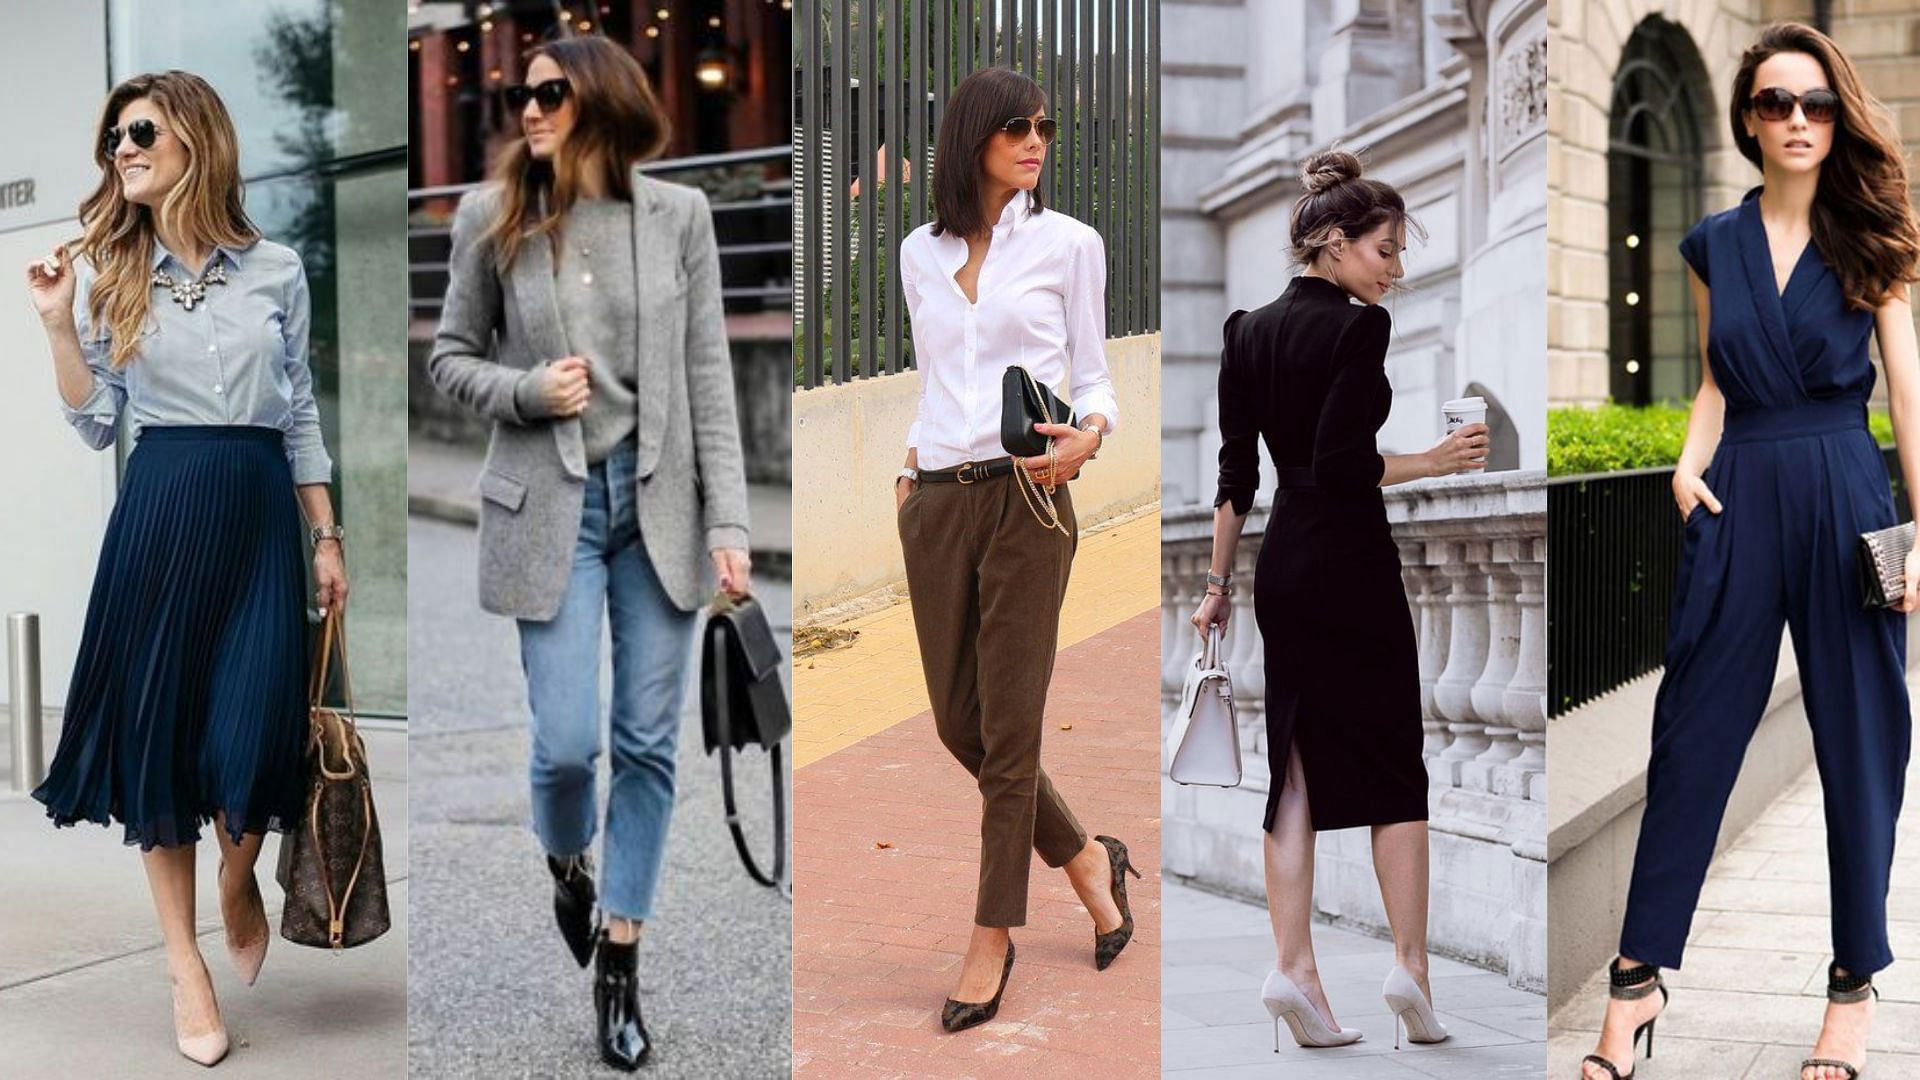 How to dress formally? 7 best work dresses for women